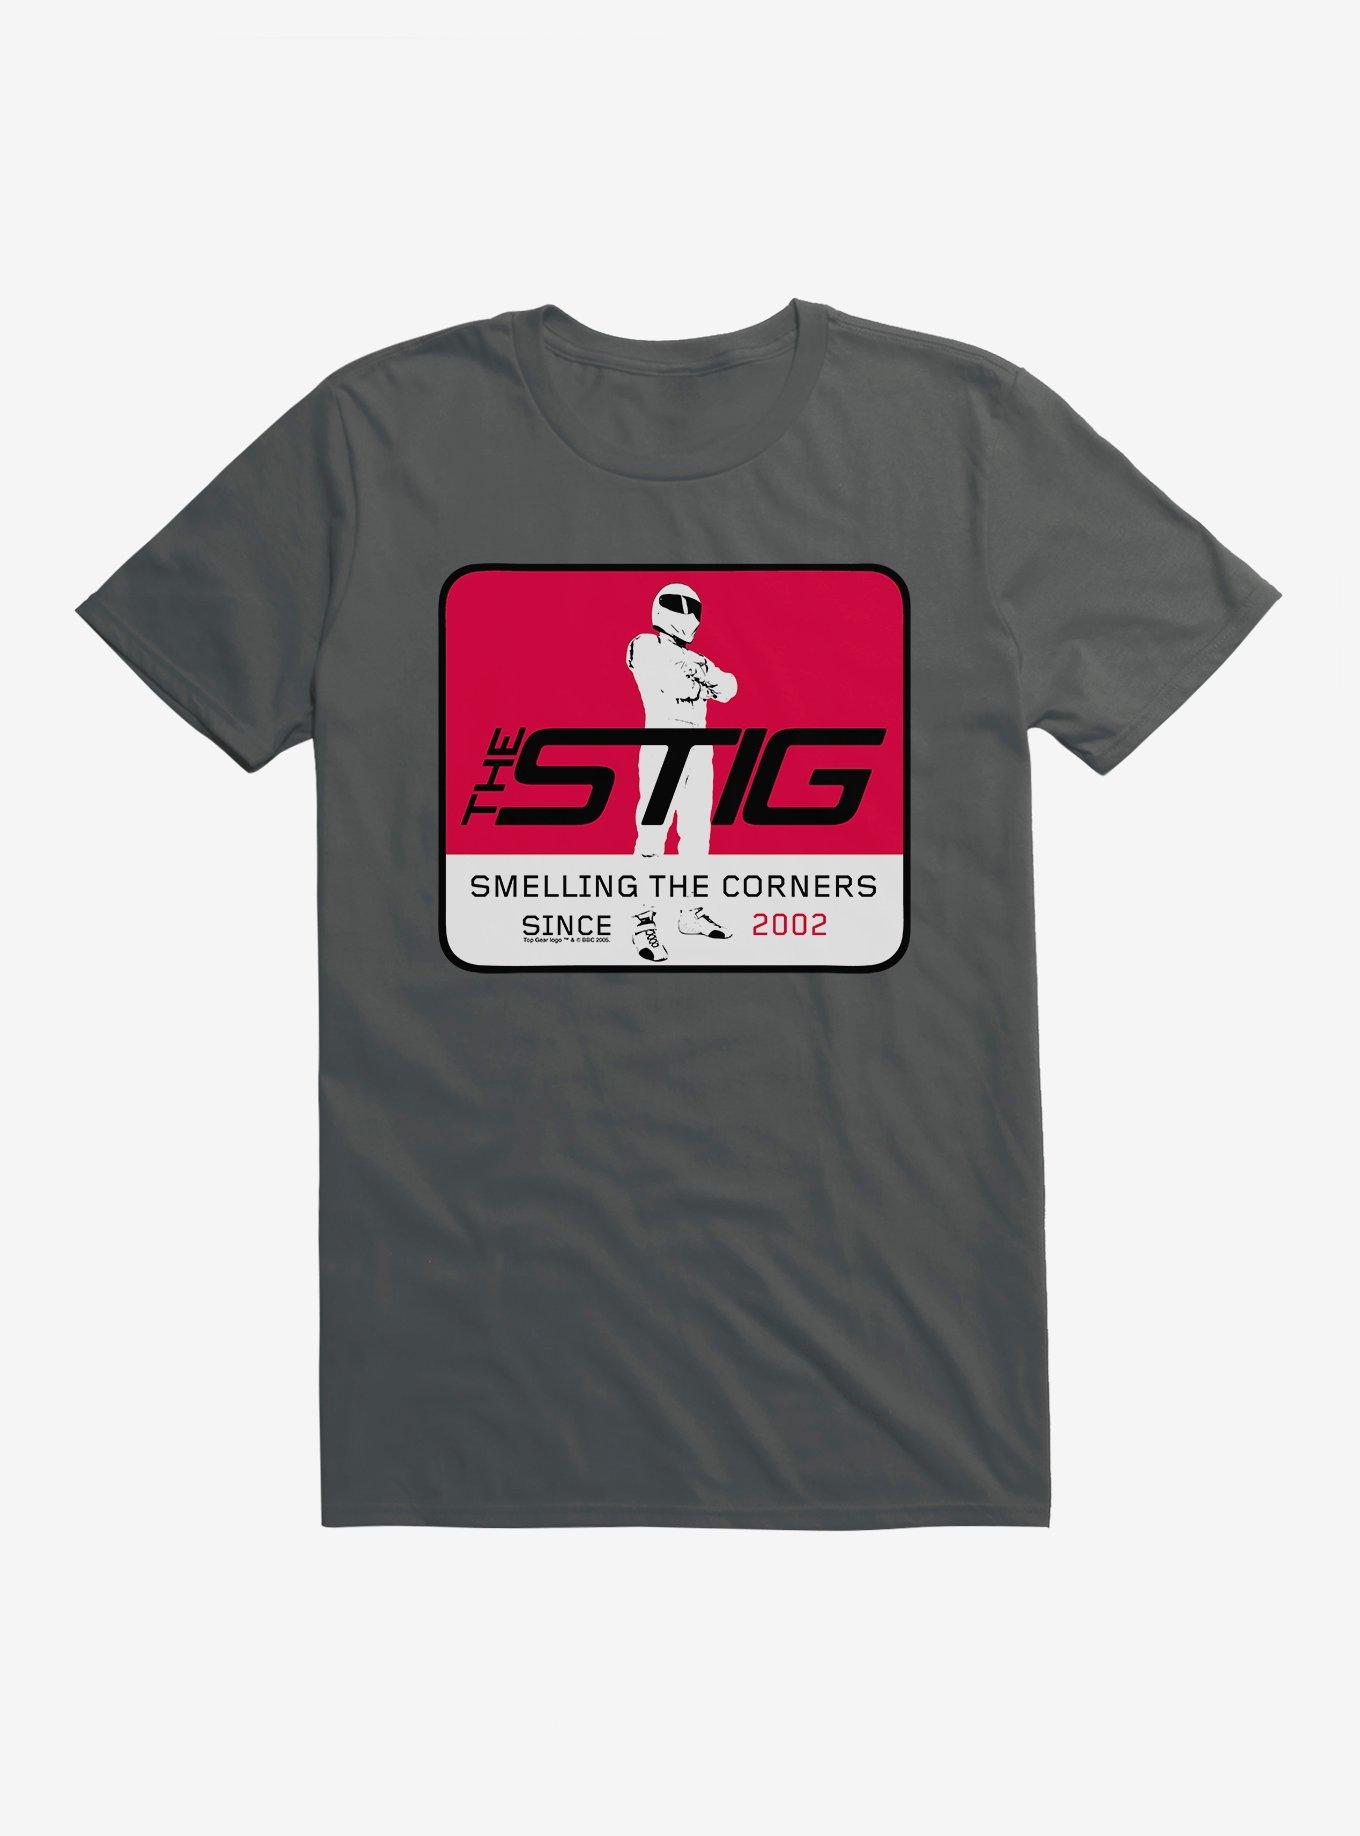 Top Gear Smelling Corners T-Shirt